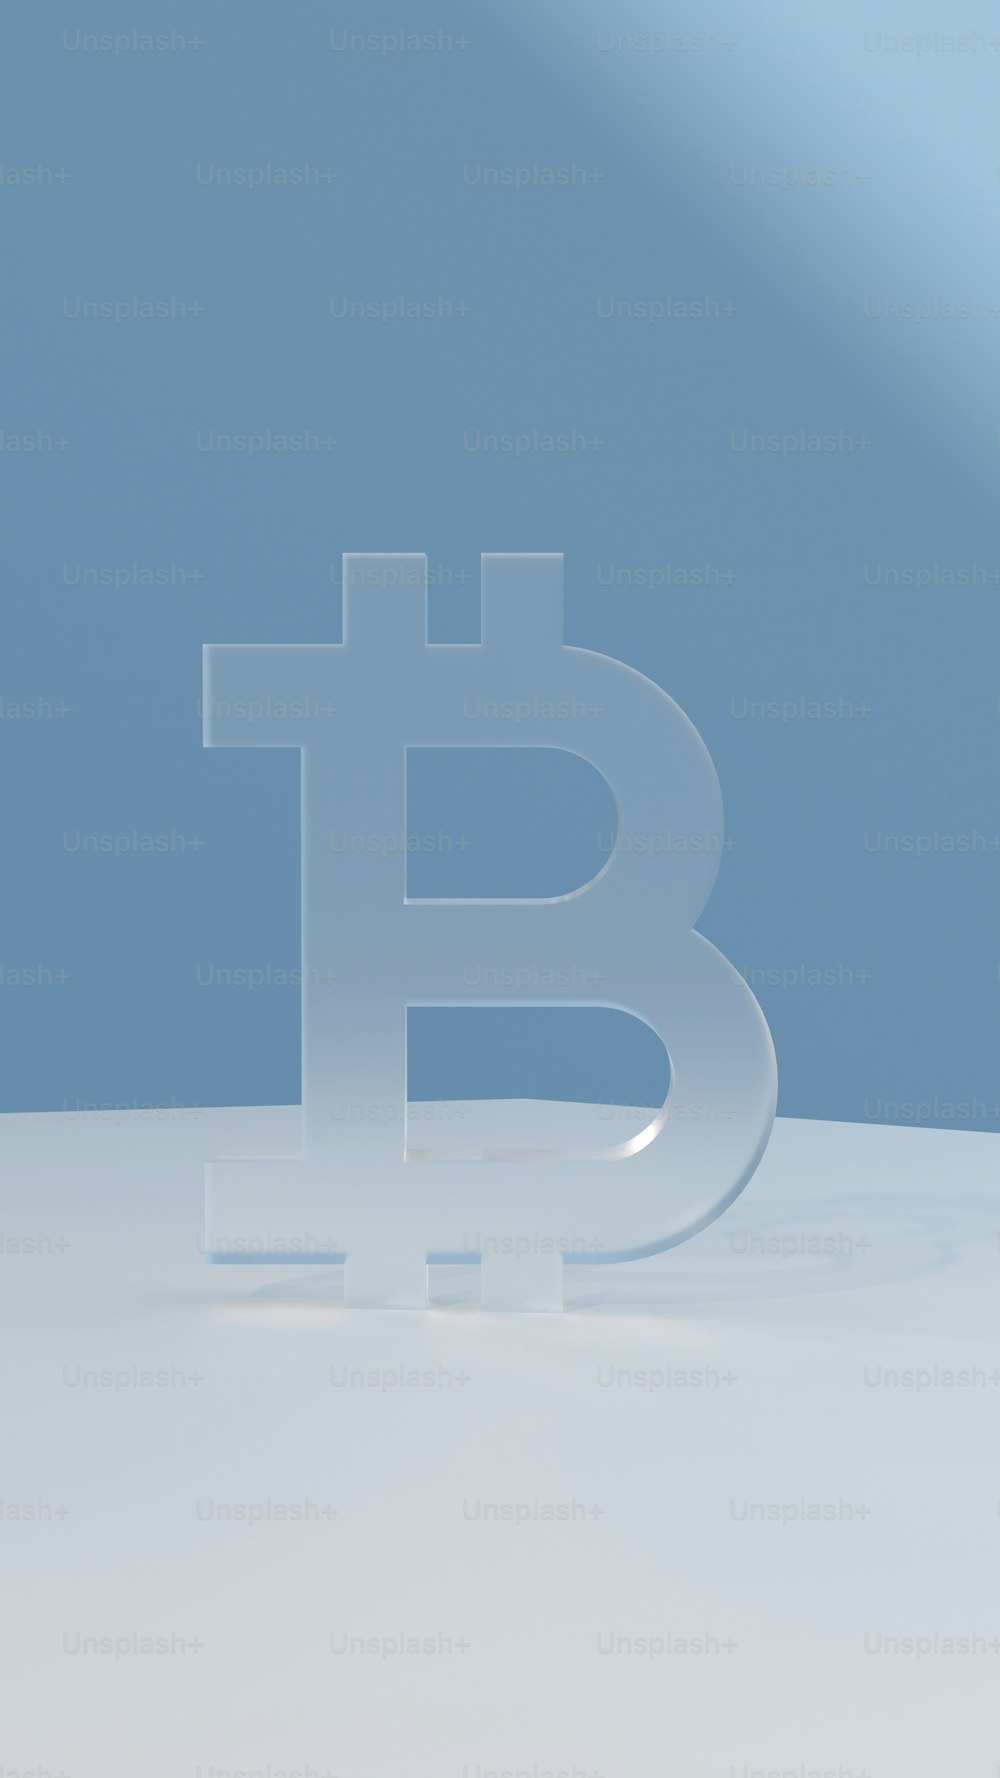 a bitcoin logo is shown on a white surface